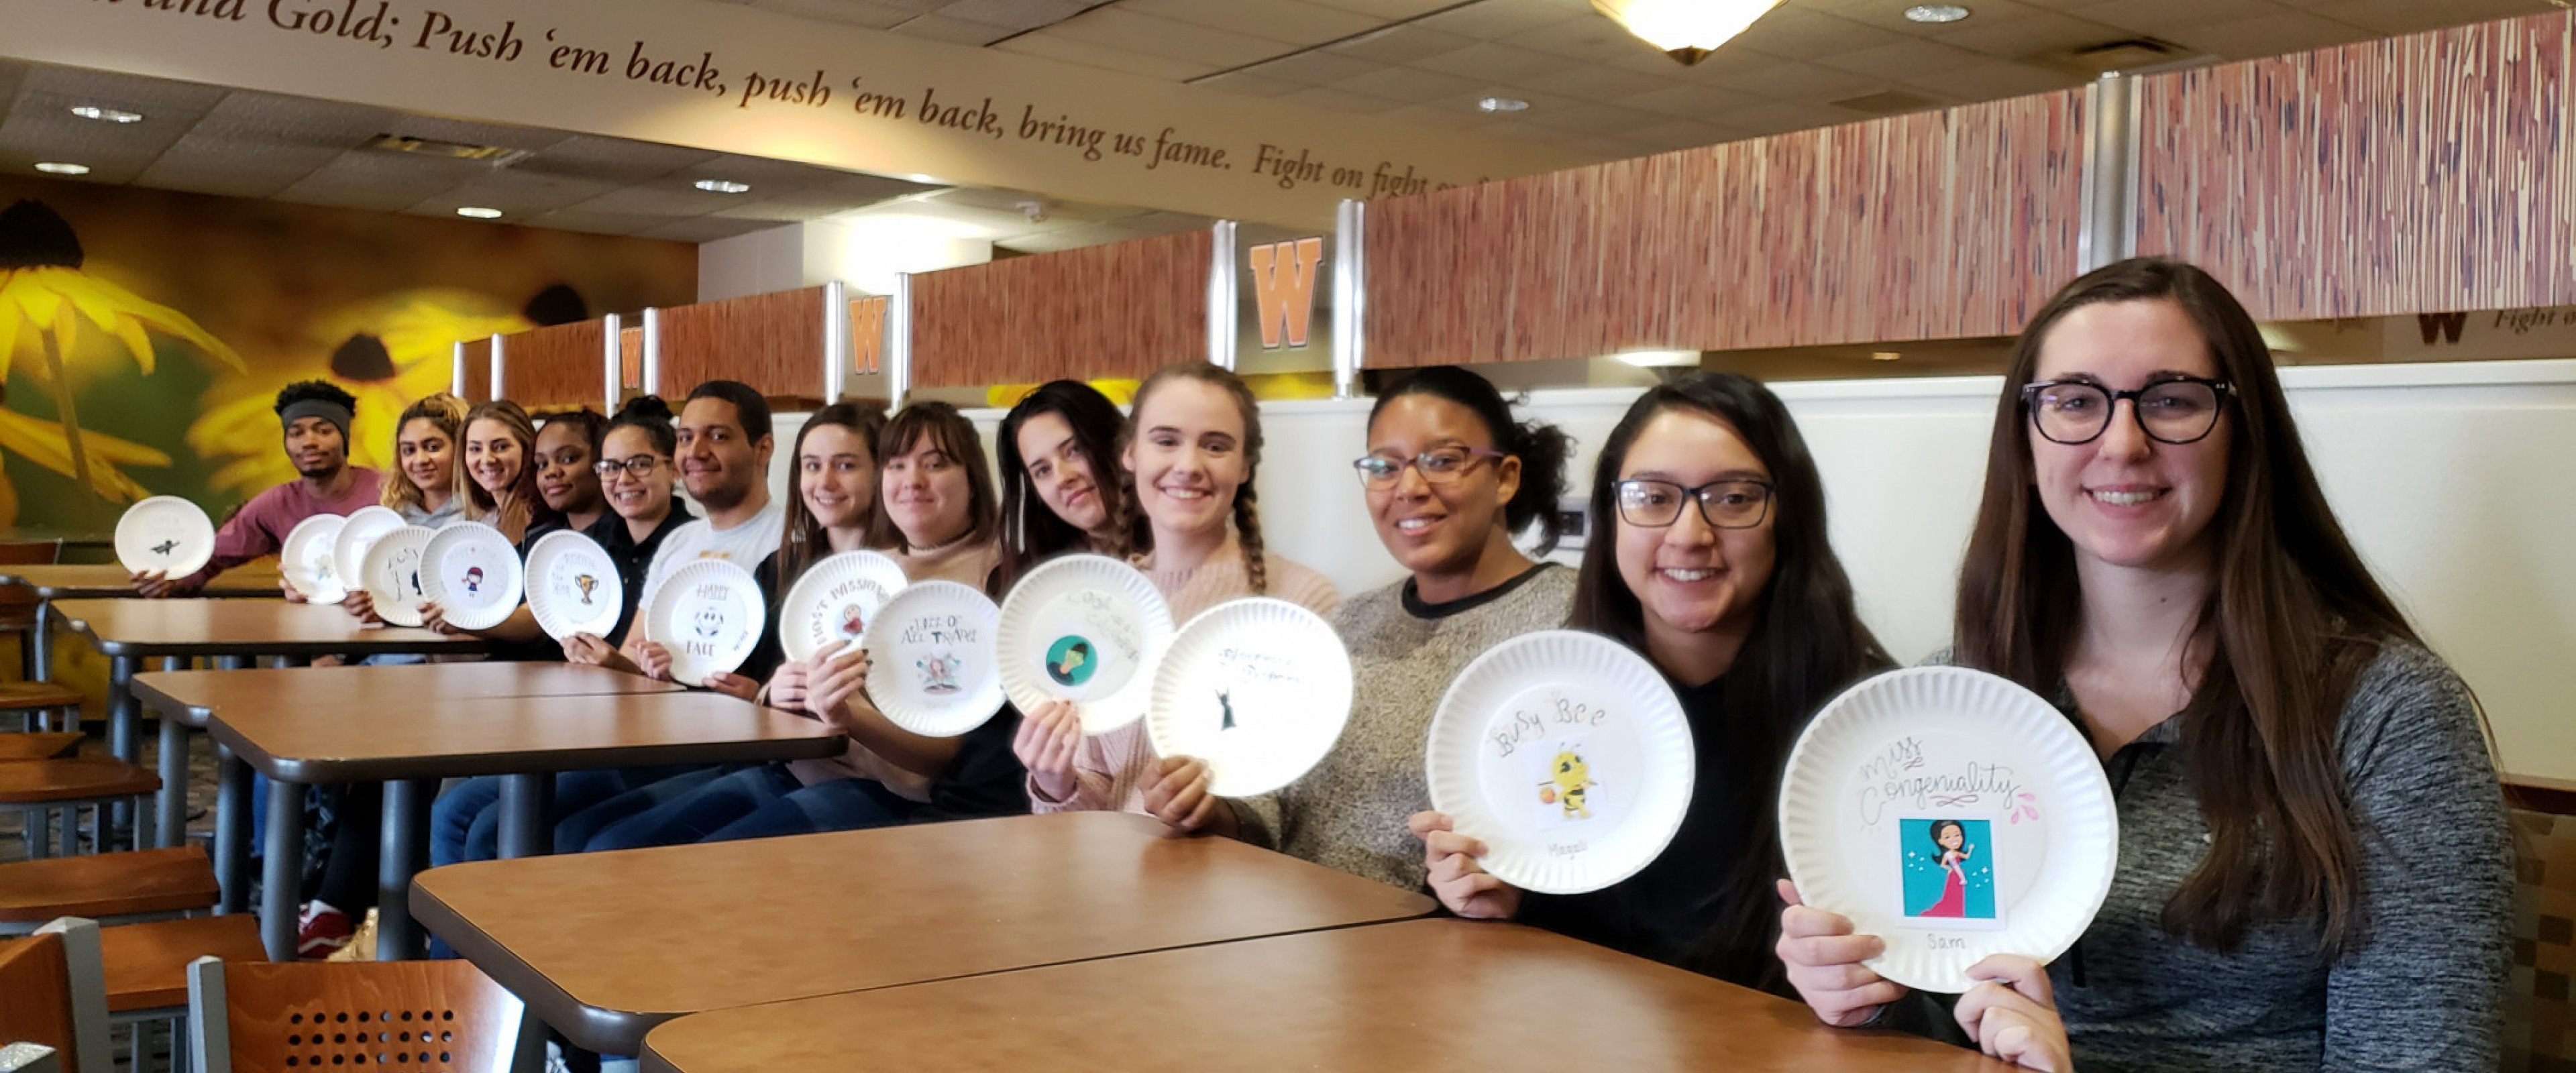 A row of 13 students sitting down, holding up their paper plate awards and smiling at the camera.